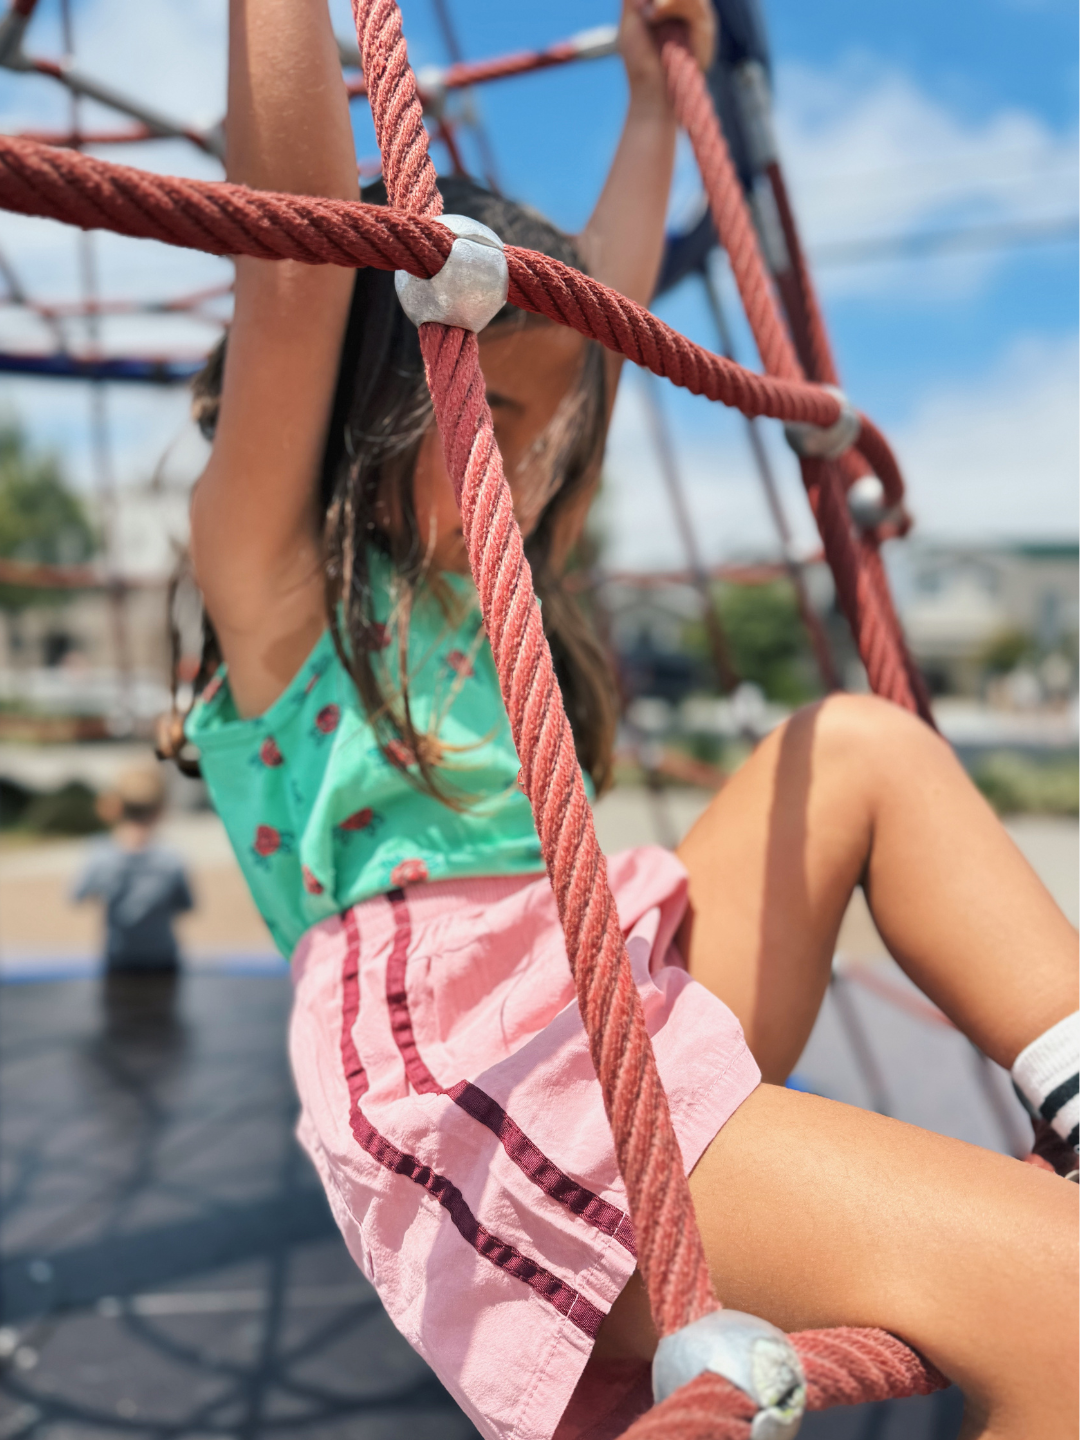 Dusty Pink | Girl wearing the kids track shorts in dusty pink with maroon stripes down the side. She also wears a green tank top patterned with red roses. She is climbing on a red rope play structure.